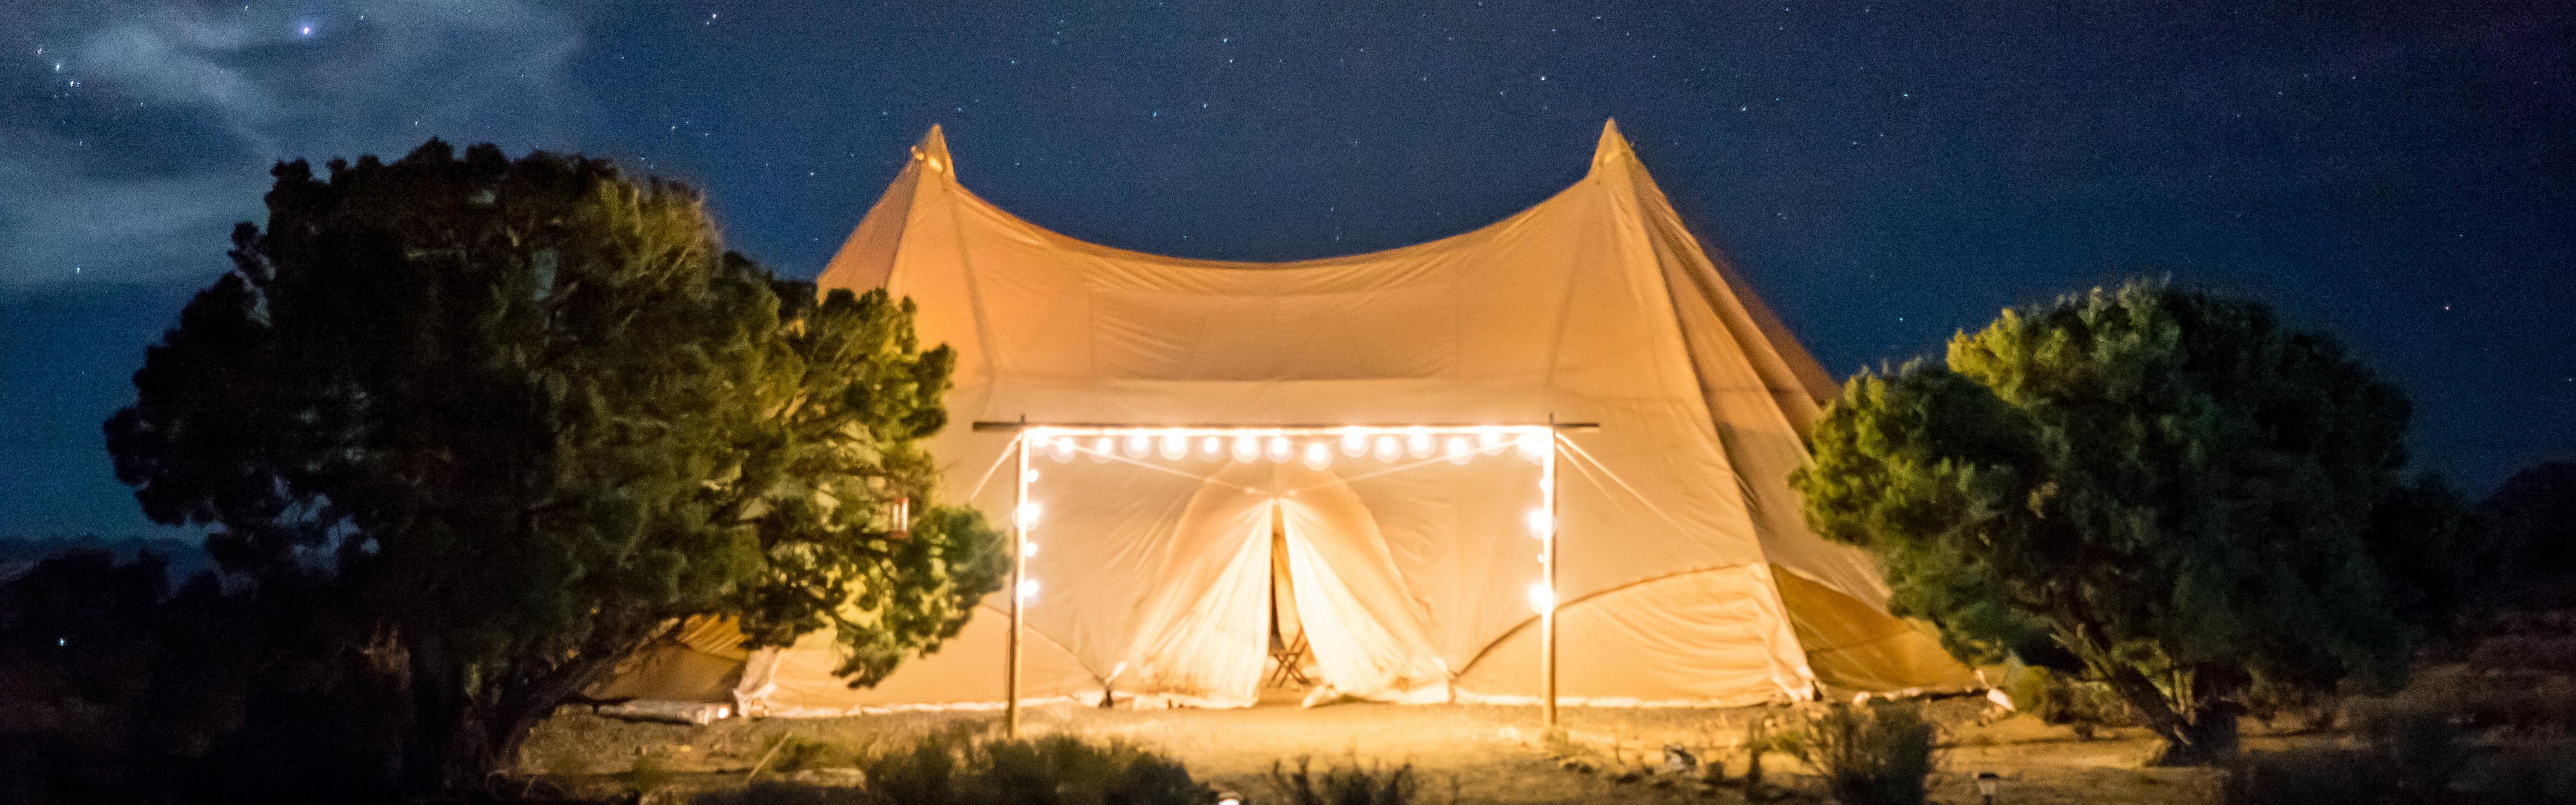 A large white tent is illuminated by a frame of lights. The night sky in the background is full of stars.